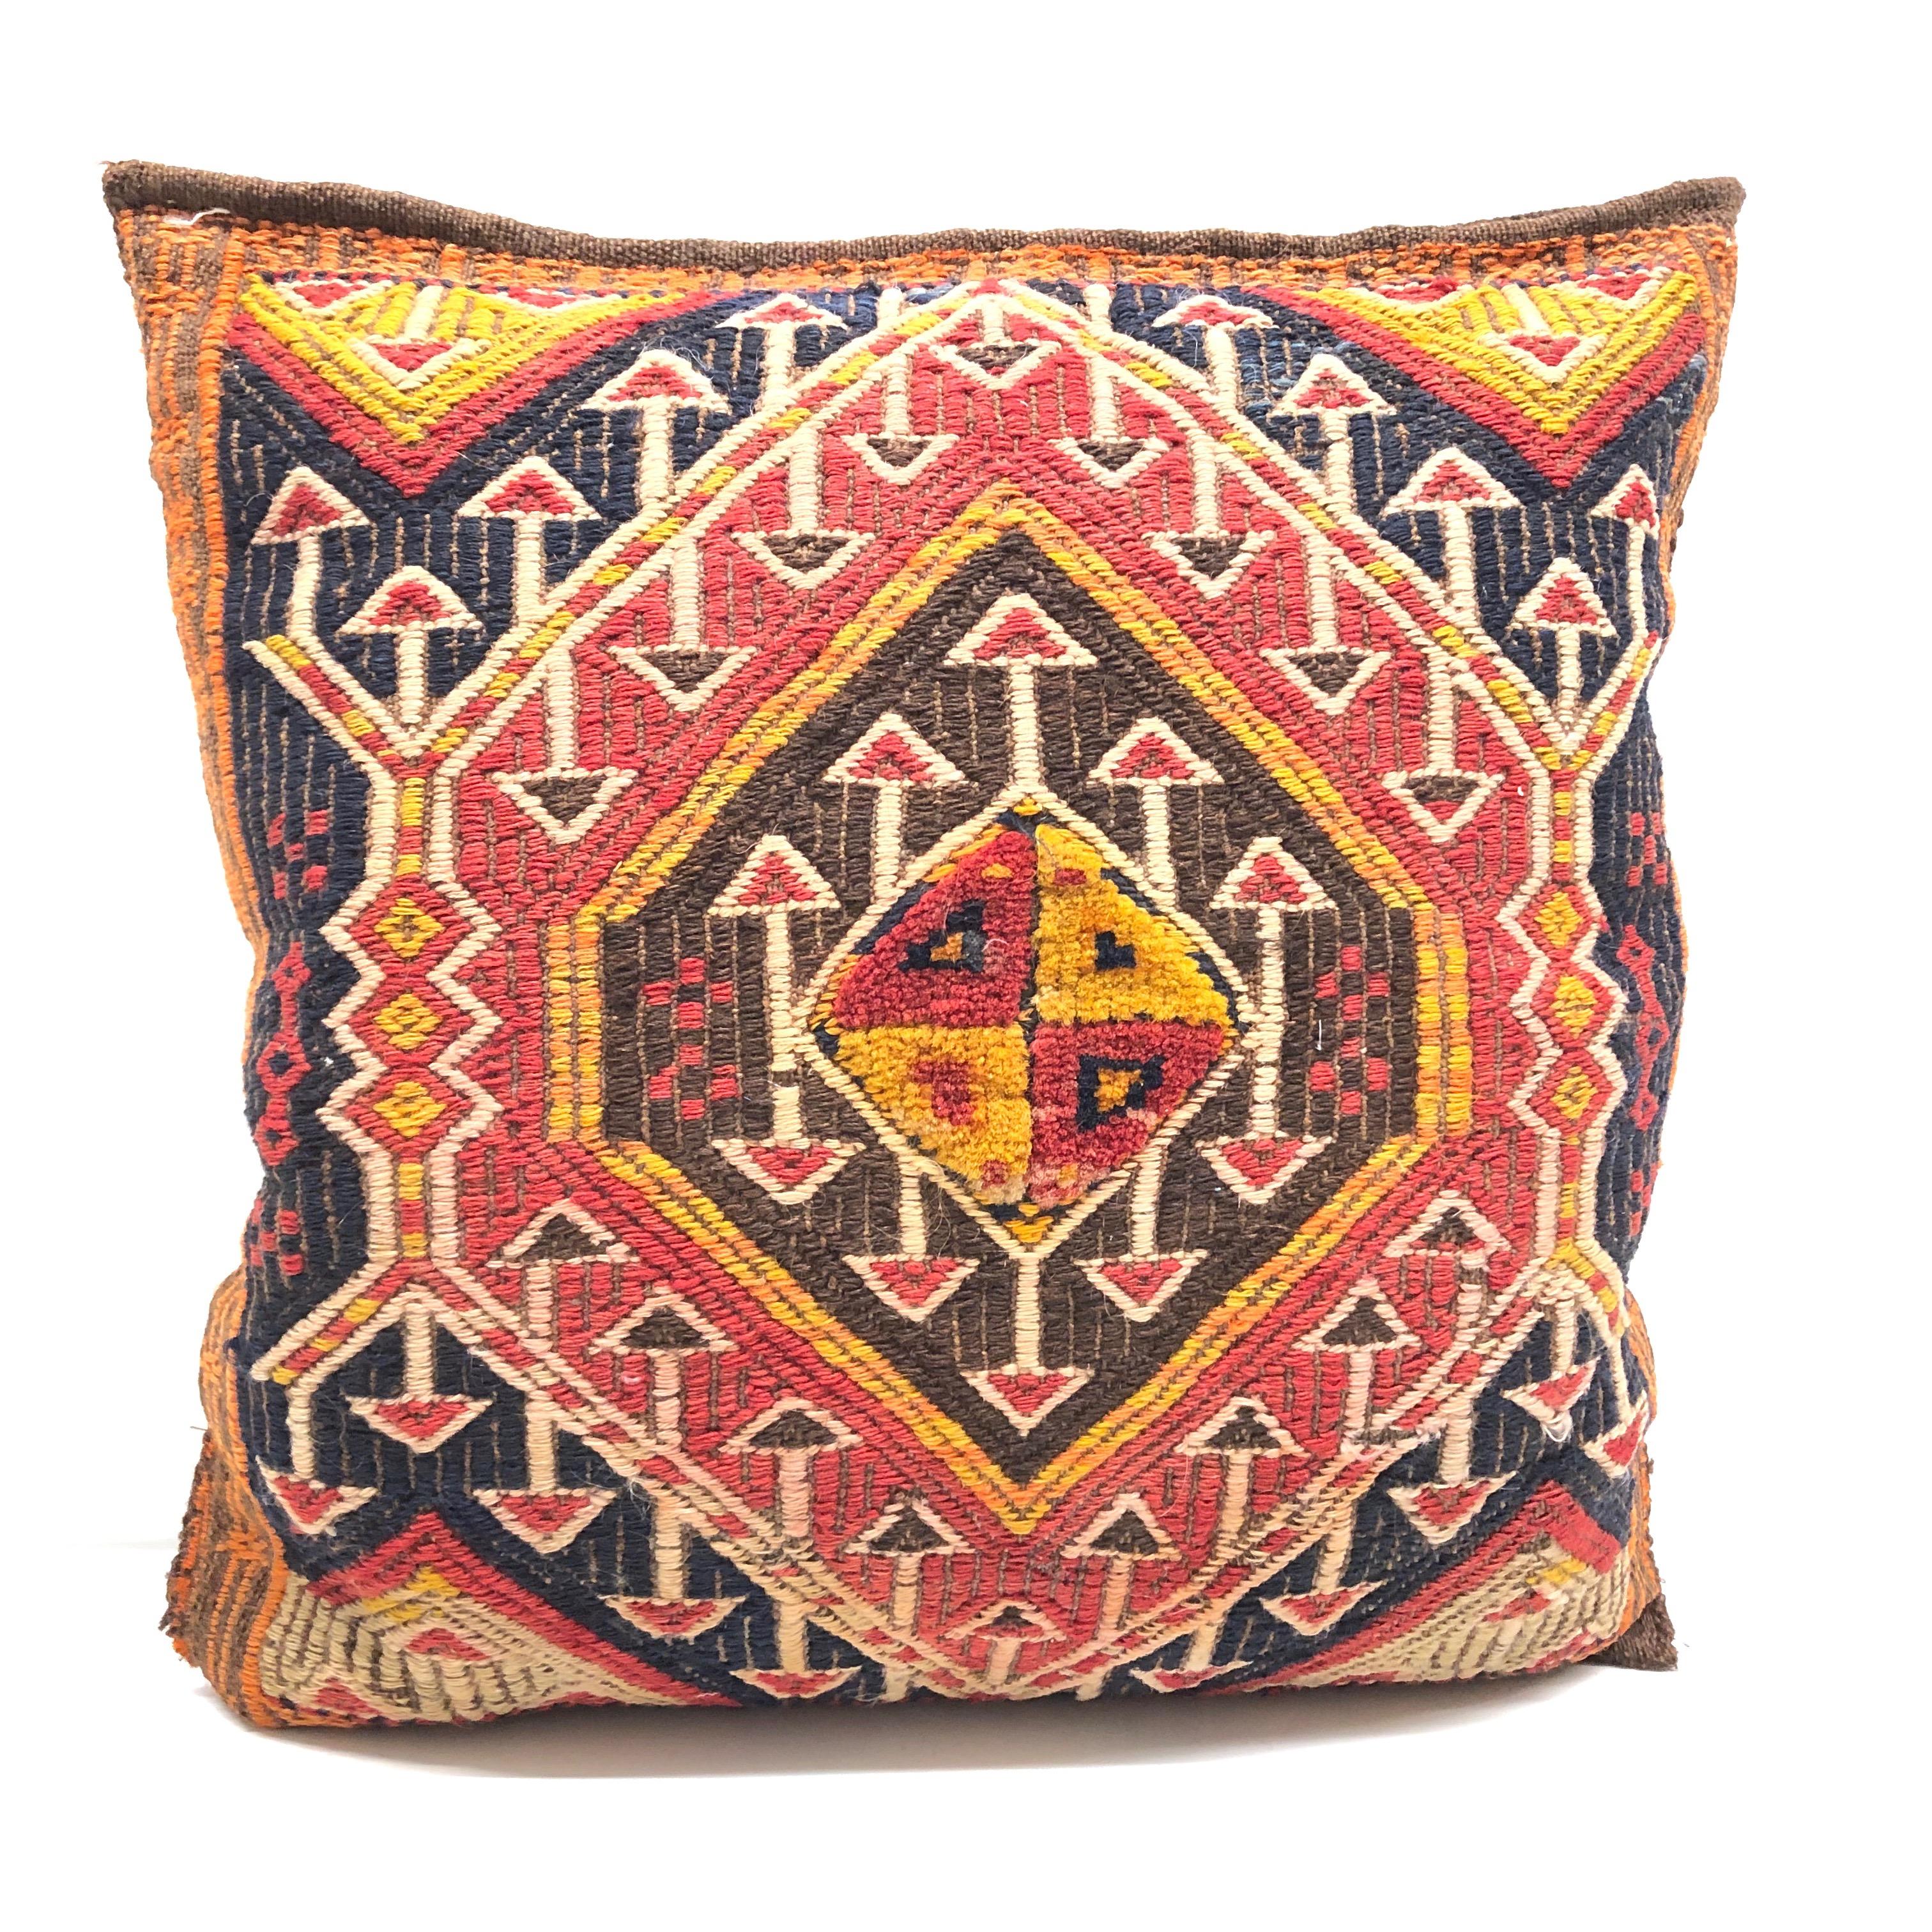 Early 20th Century Pair of Gypsy Turkish Oriental Salt Bag or Rug Embroidery Pillows For Sale